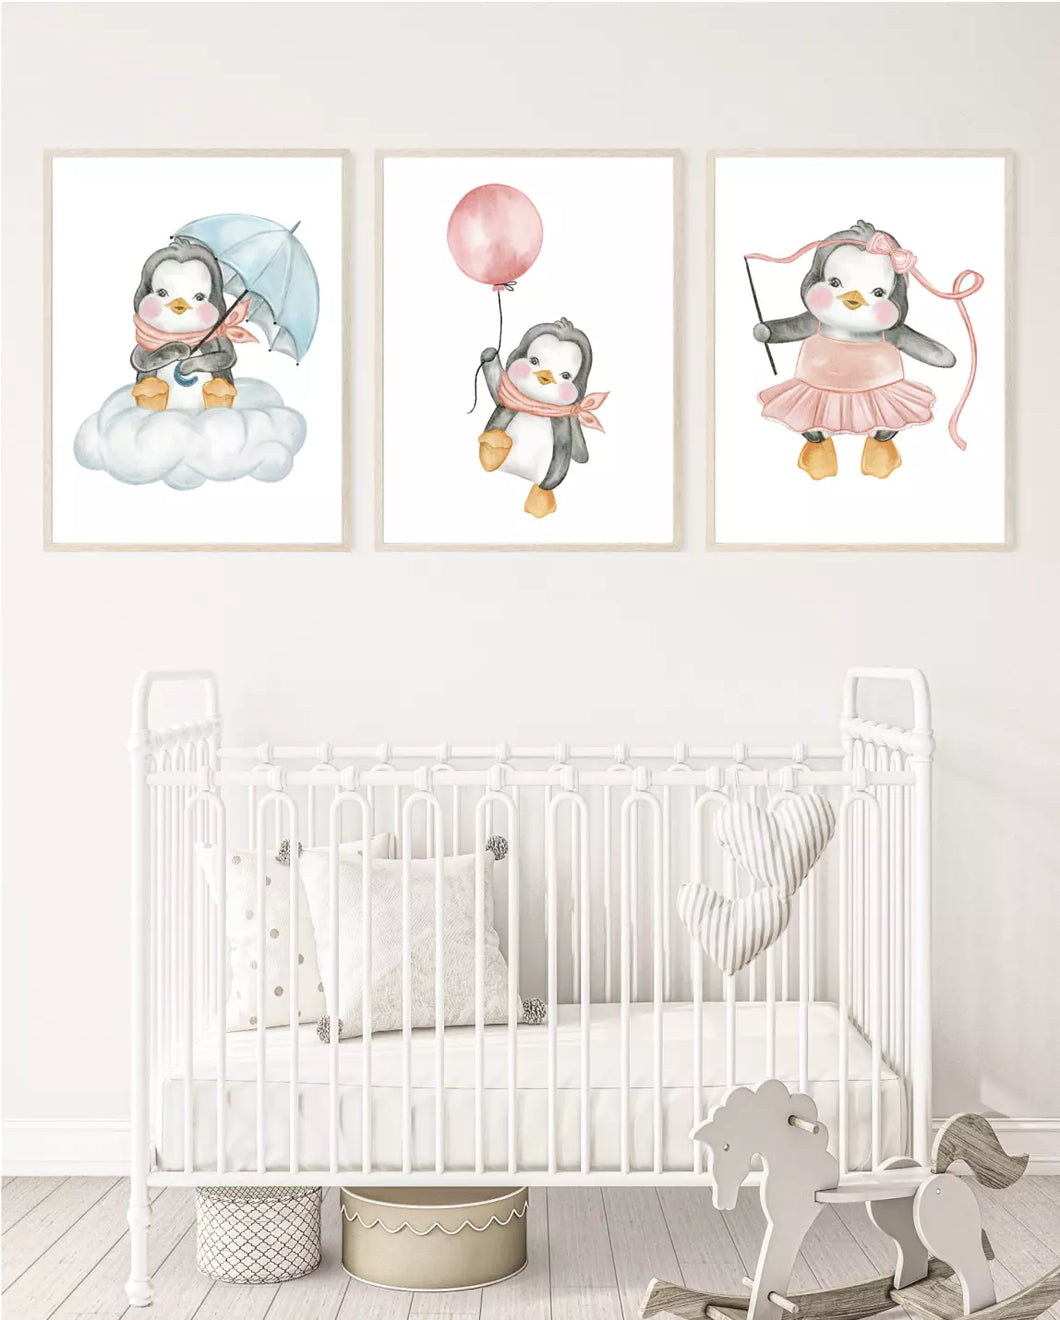 Penguins dressed in pink wall art, poster prints, various sizes, set of 3 prints